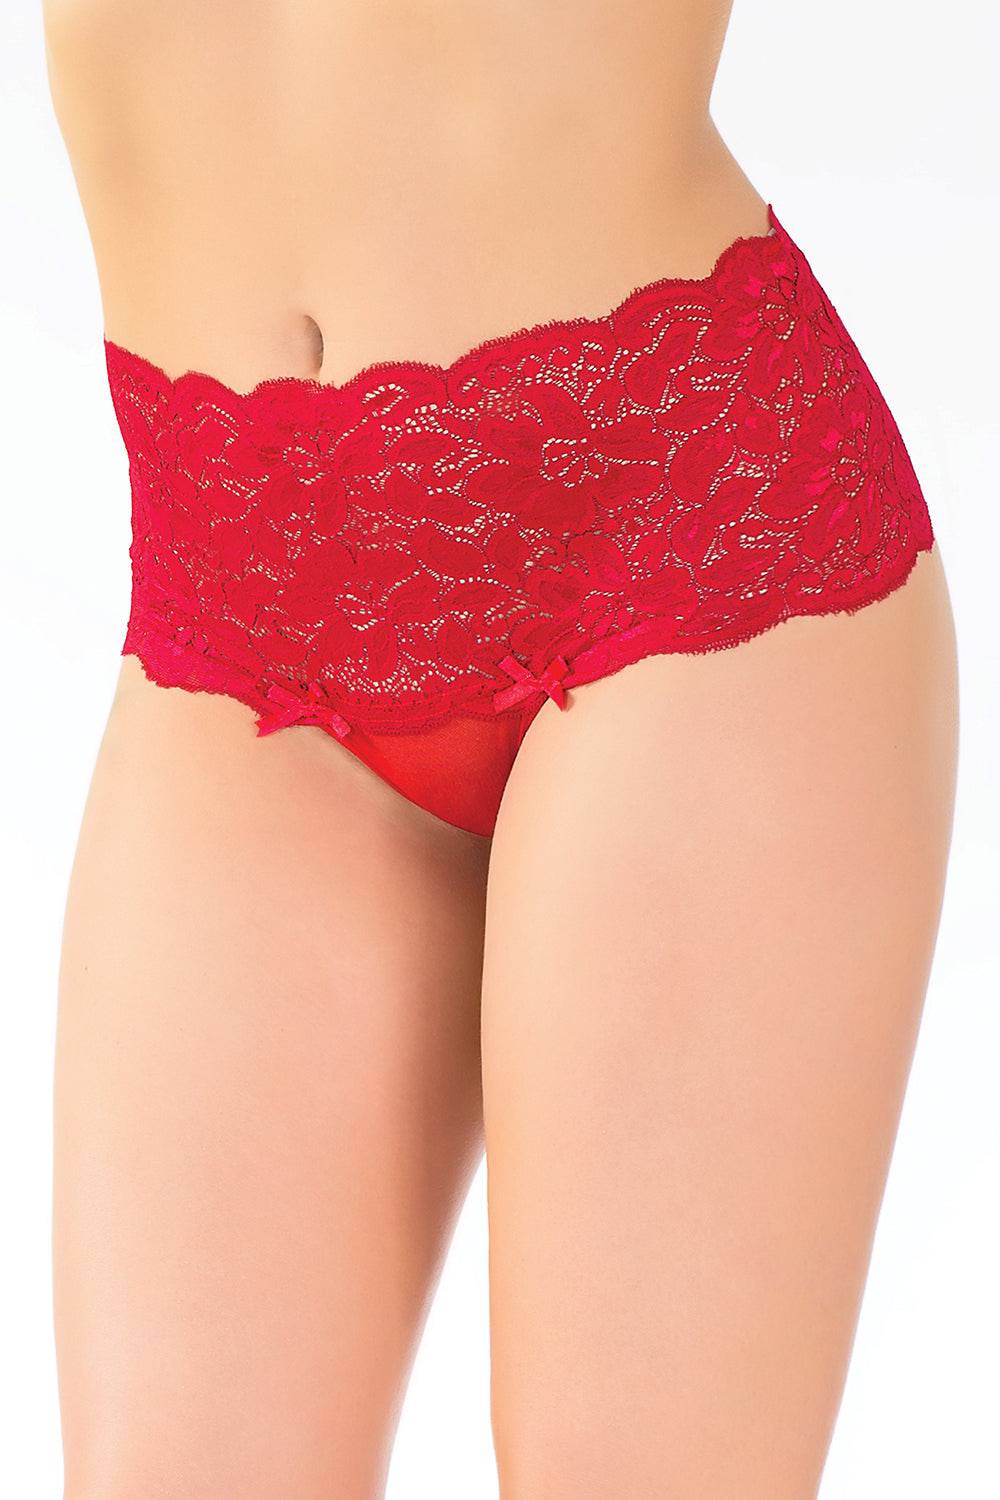 Coquette - 111 - High-Waisted Lace Thong - Stag Shop